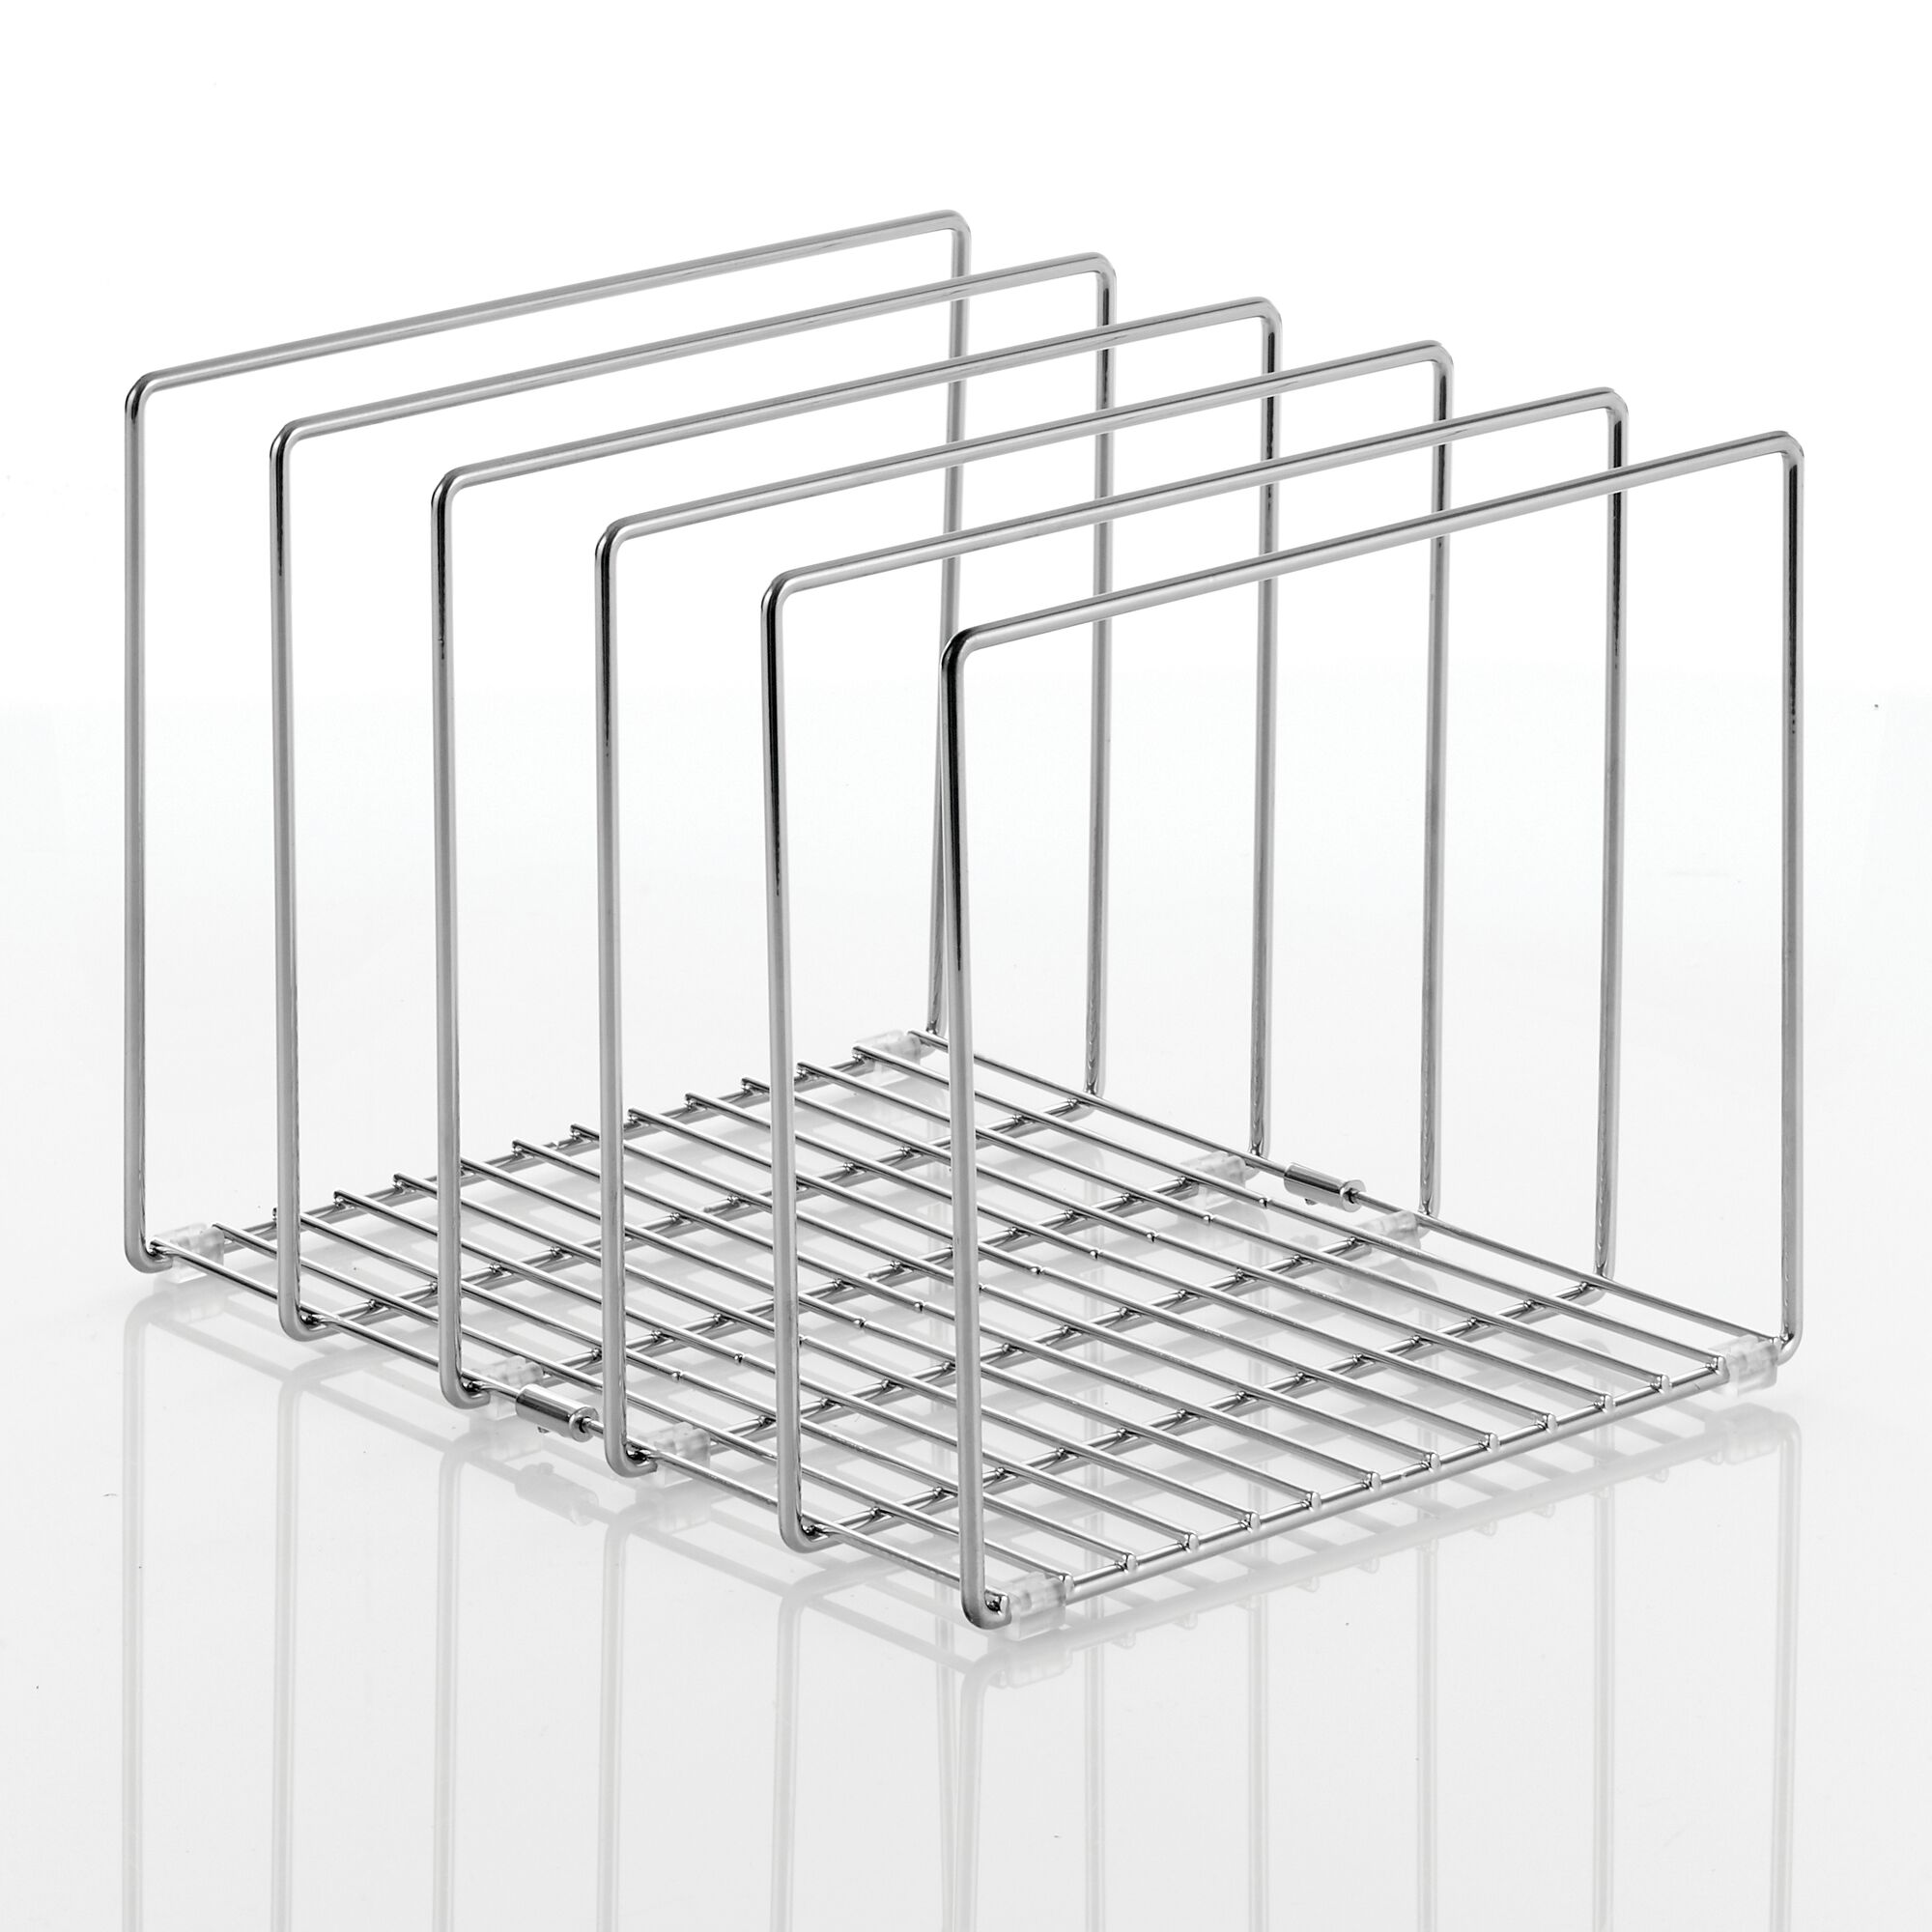 STORKING 2 Tier Wire Basket Pull Out Organizer Shelf Sliding Drawer Storage for Kitchen Base, Double-Tier Heavy Duty Cabinets Chrome-Plating, 15W x